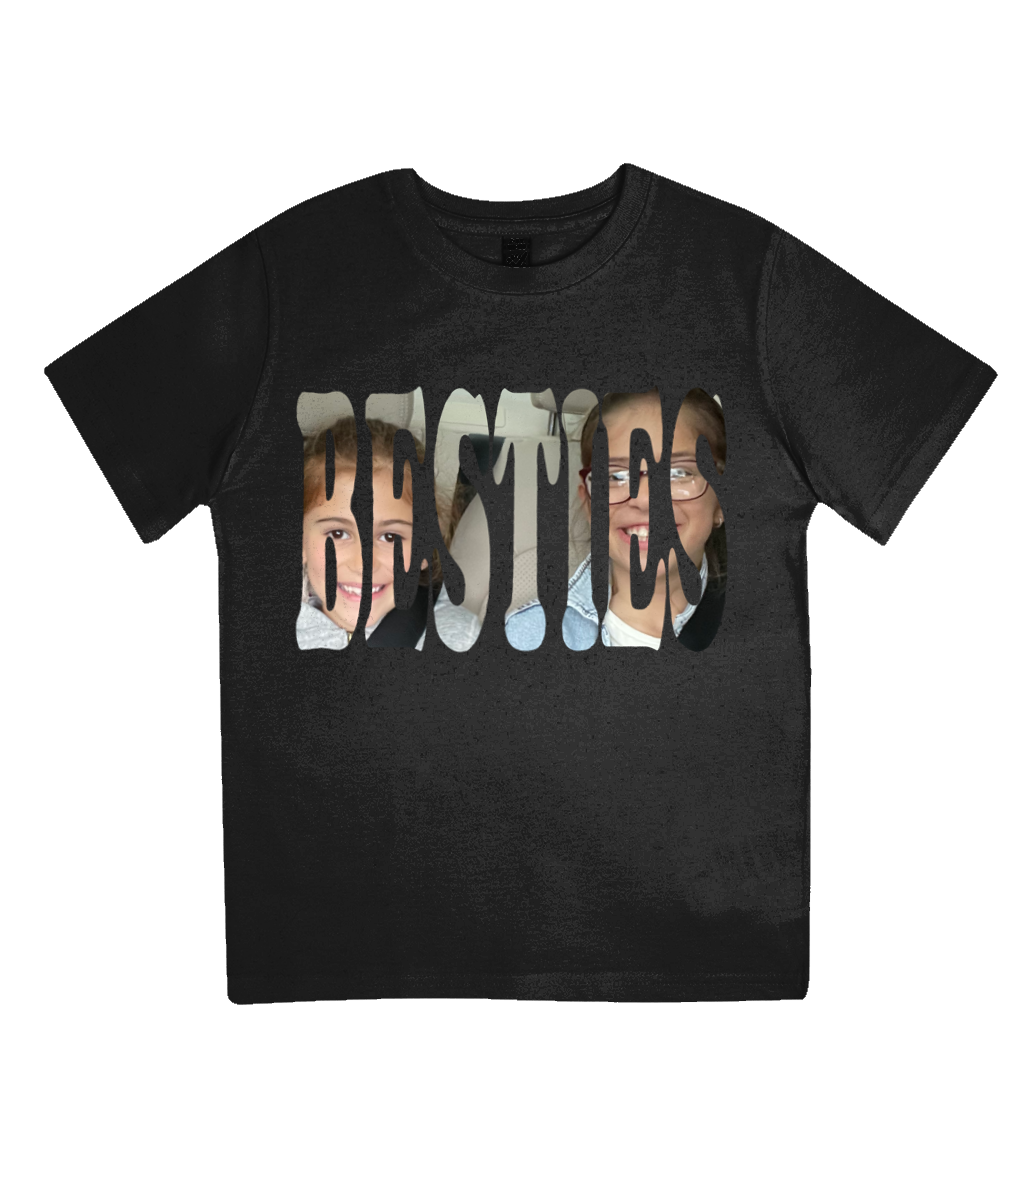 Black t-shirt with besties' text and picture, integrated into the text